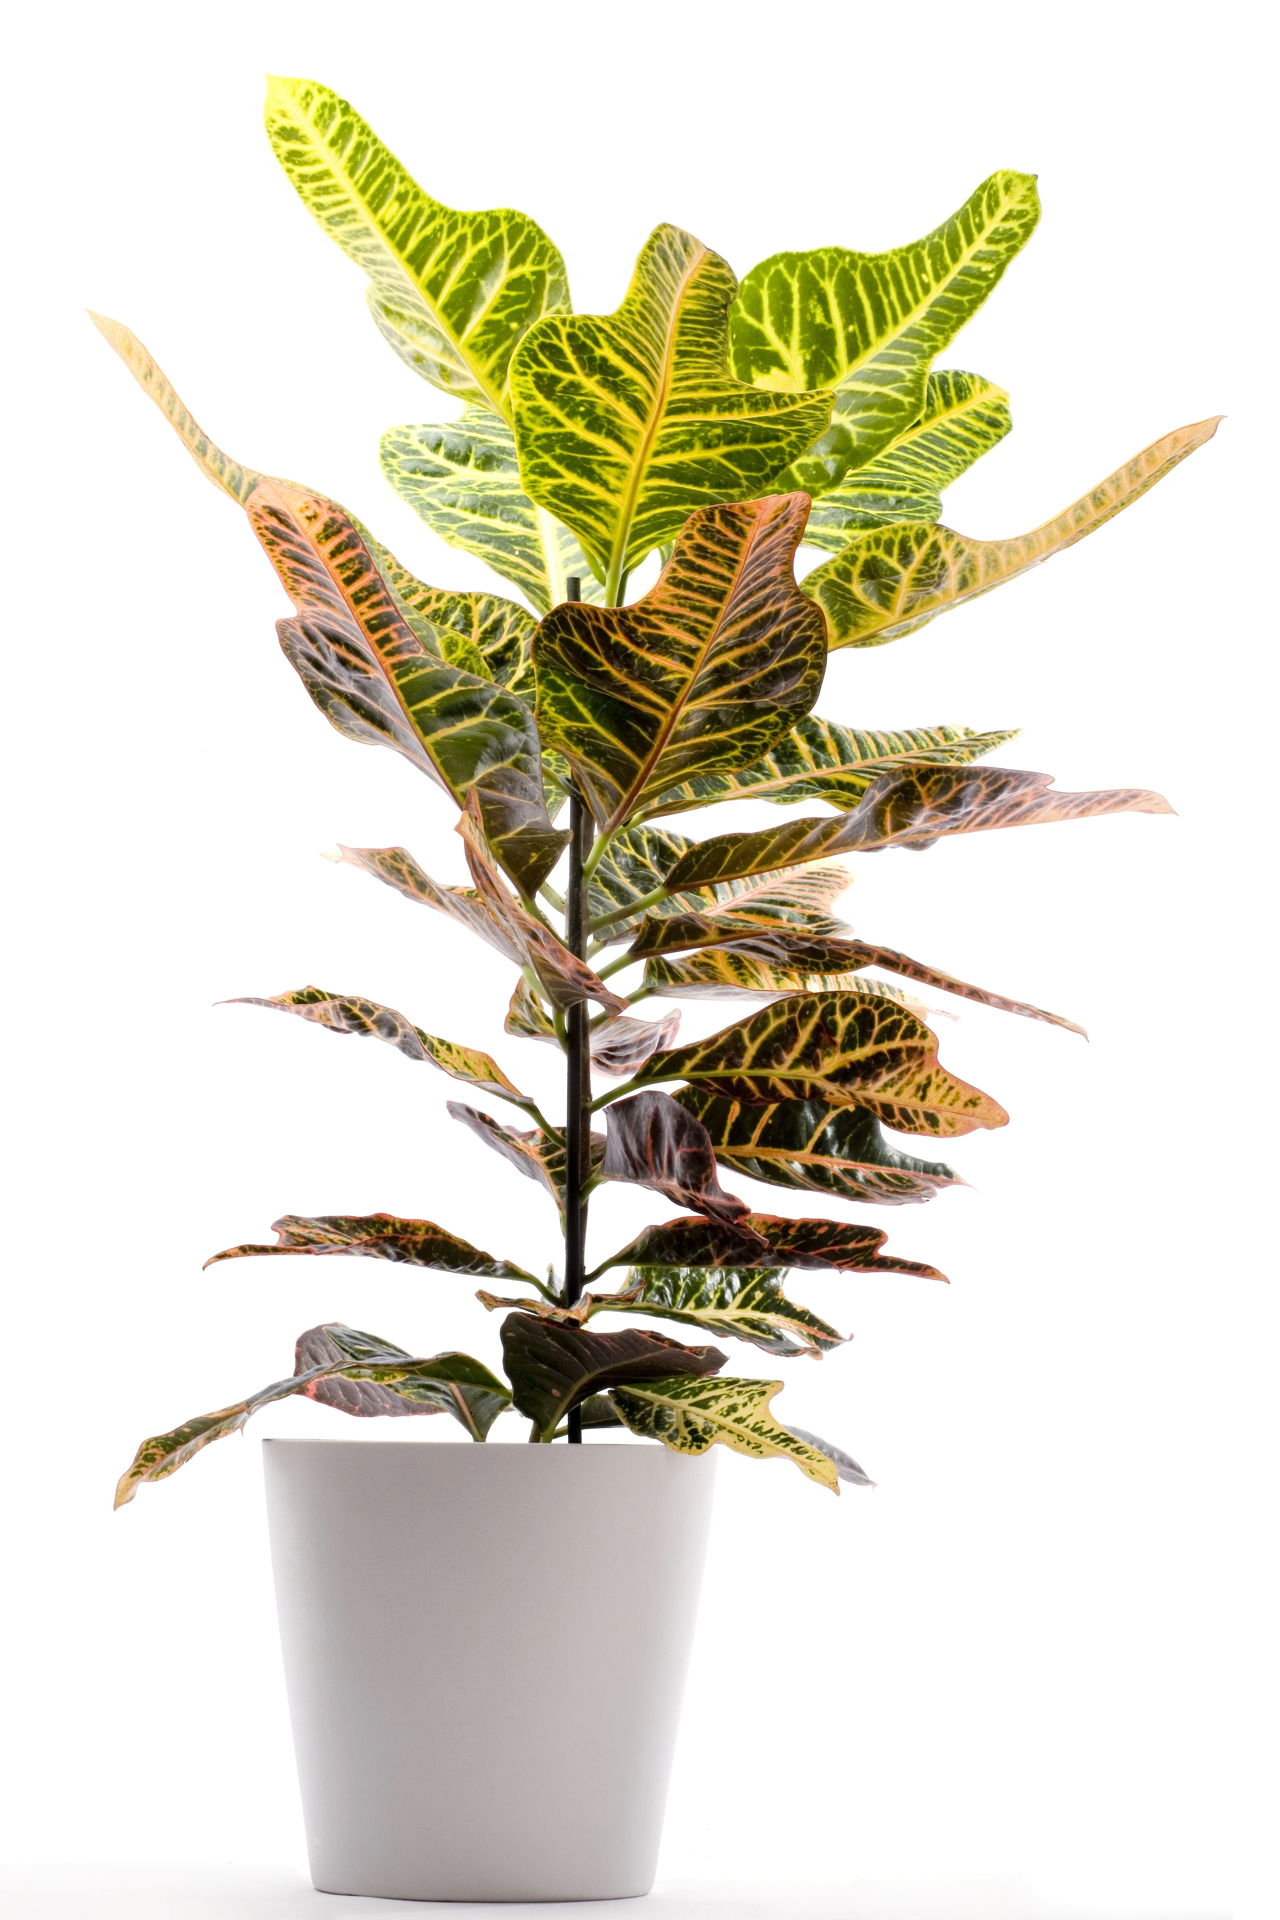 Tall Indoor Plants That are Beautiful and Easy to Maintain